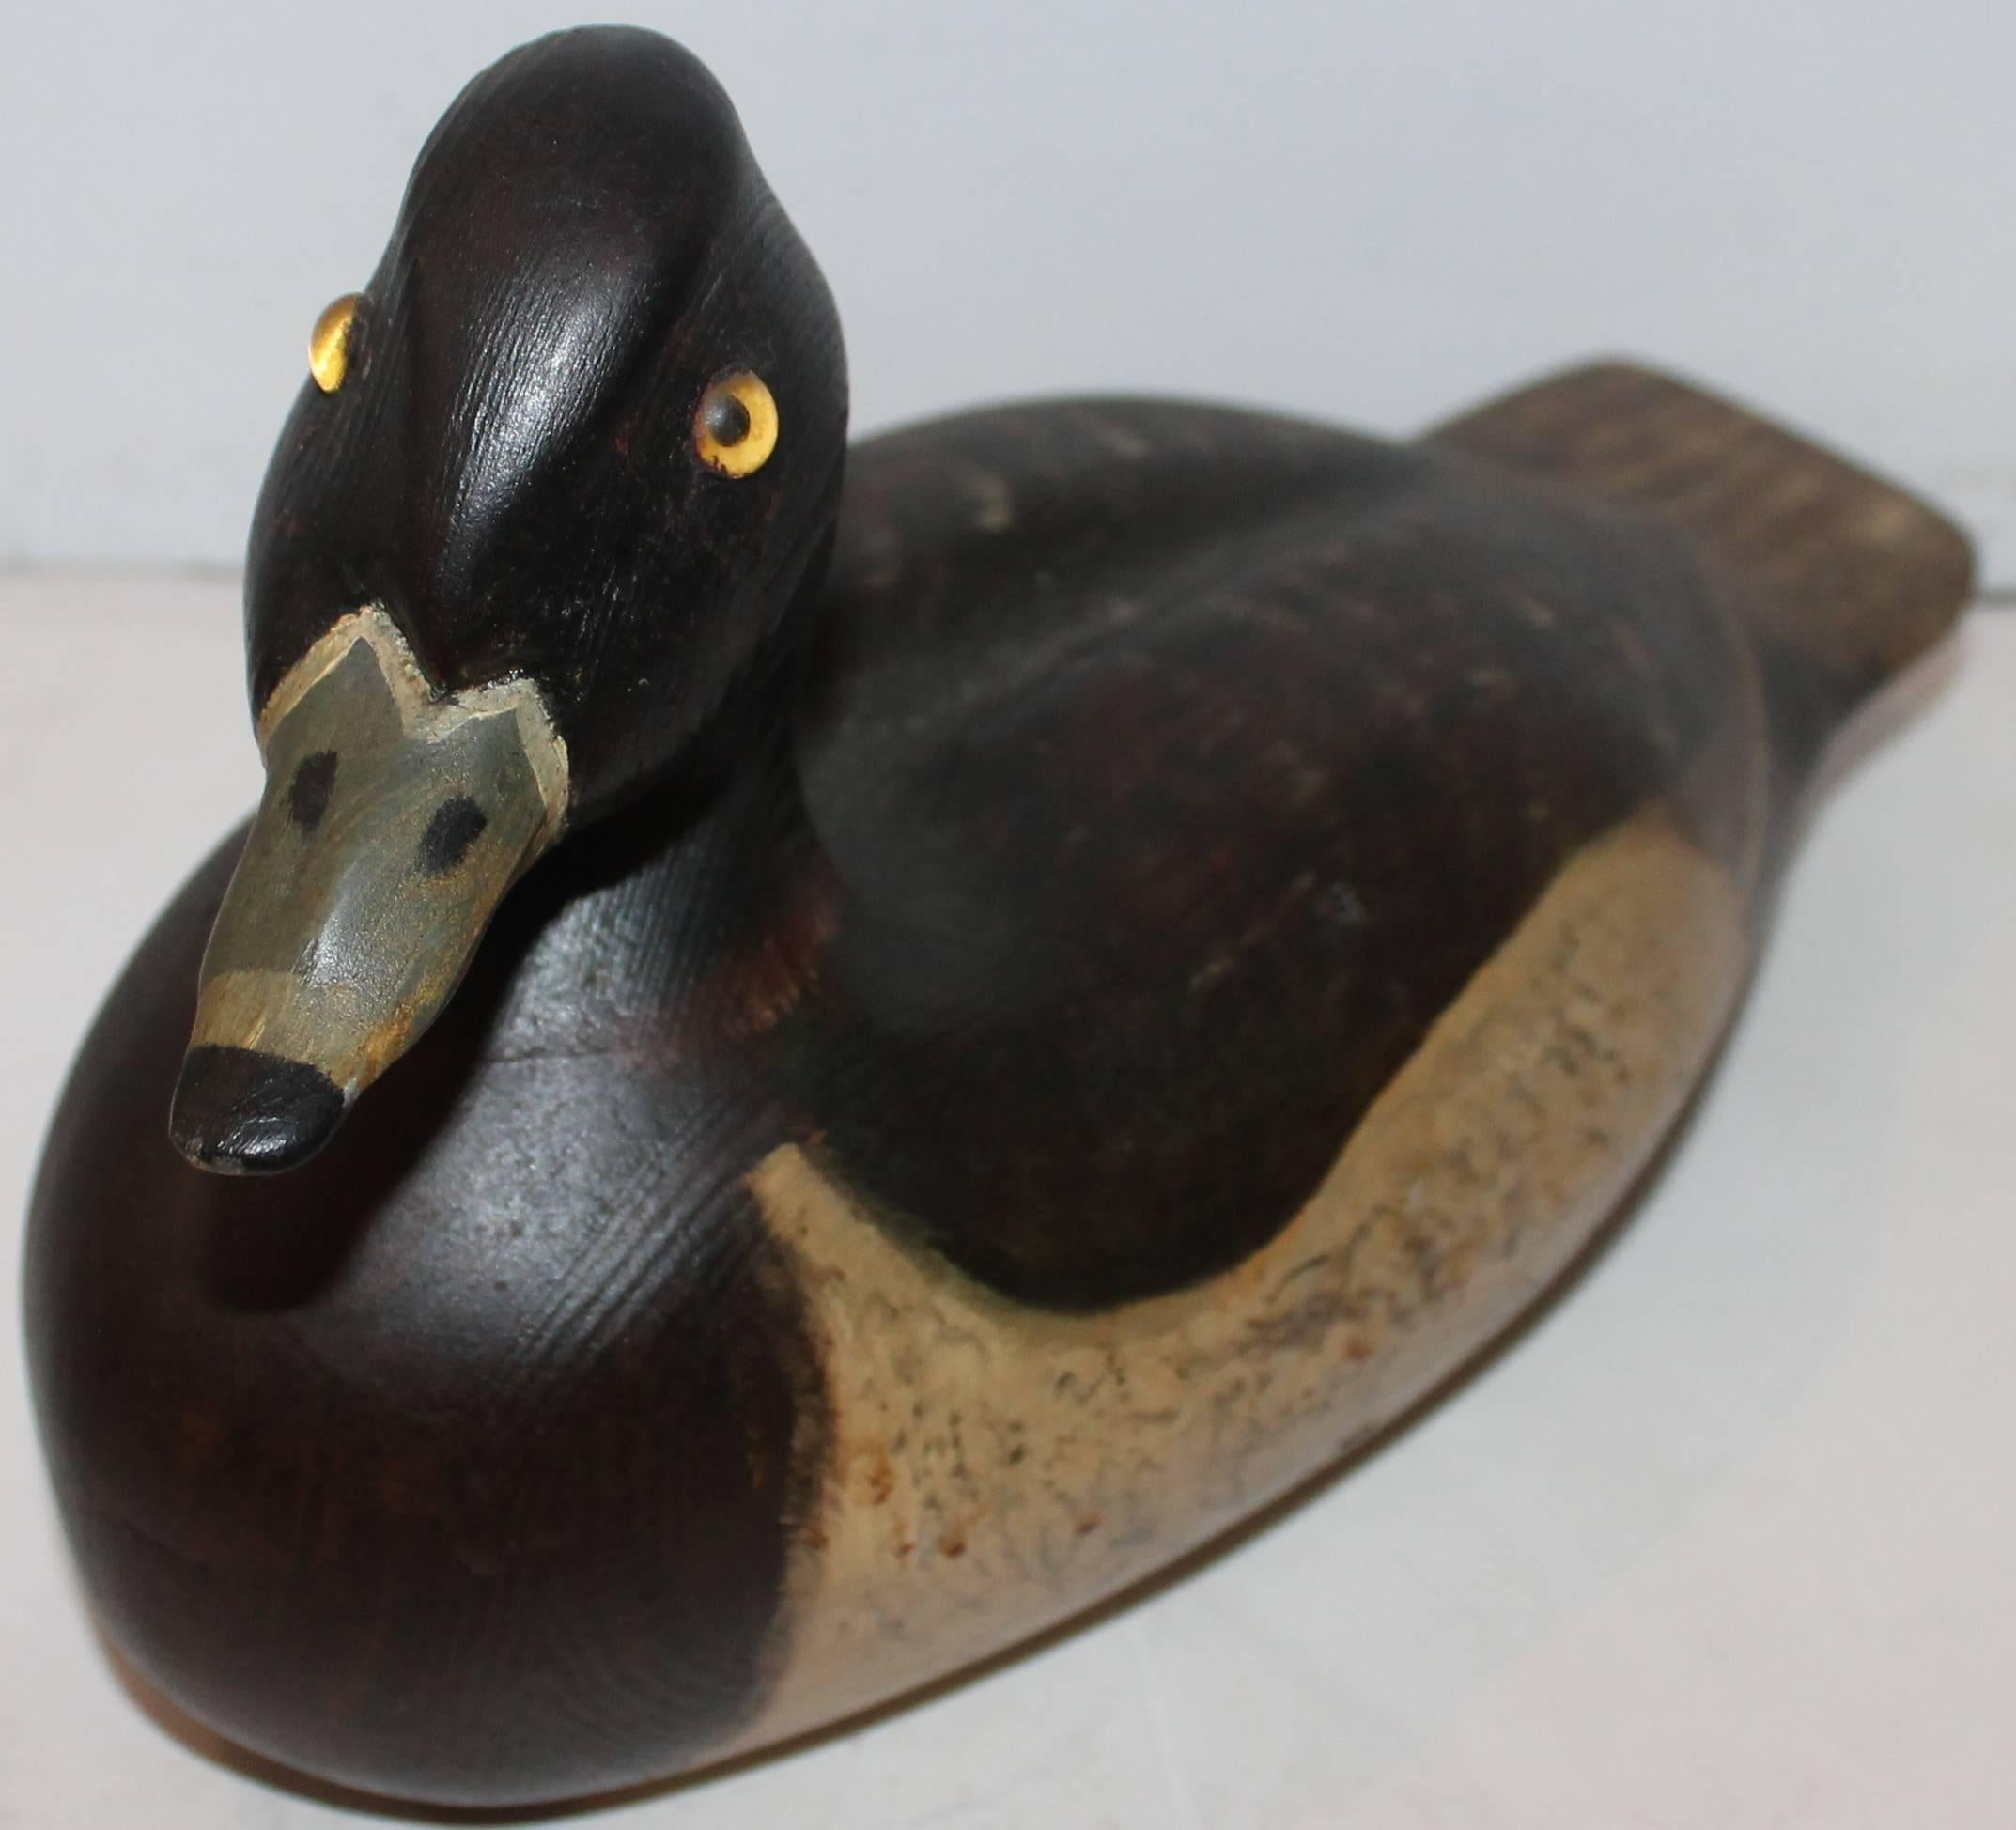 This wonderful hand-carved and painted decoy is signed Ringneck, 1990. This was made for a friend and given as a gift. Condition is mint. Great patina and untouched surface.